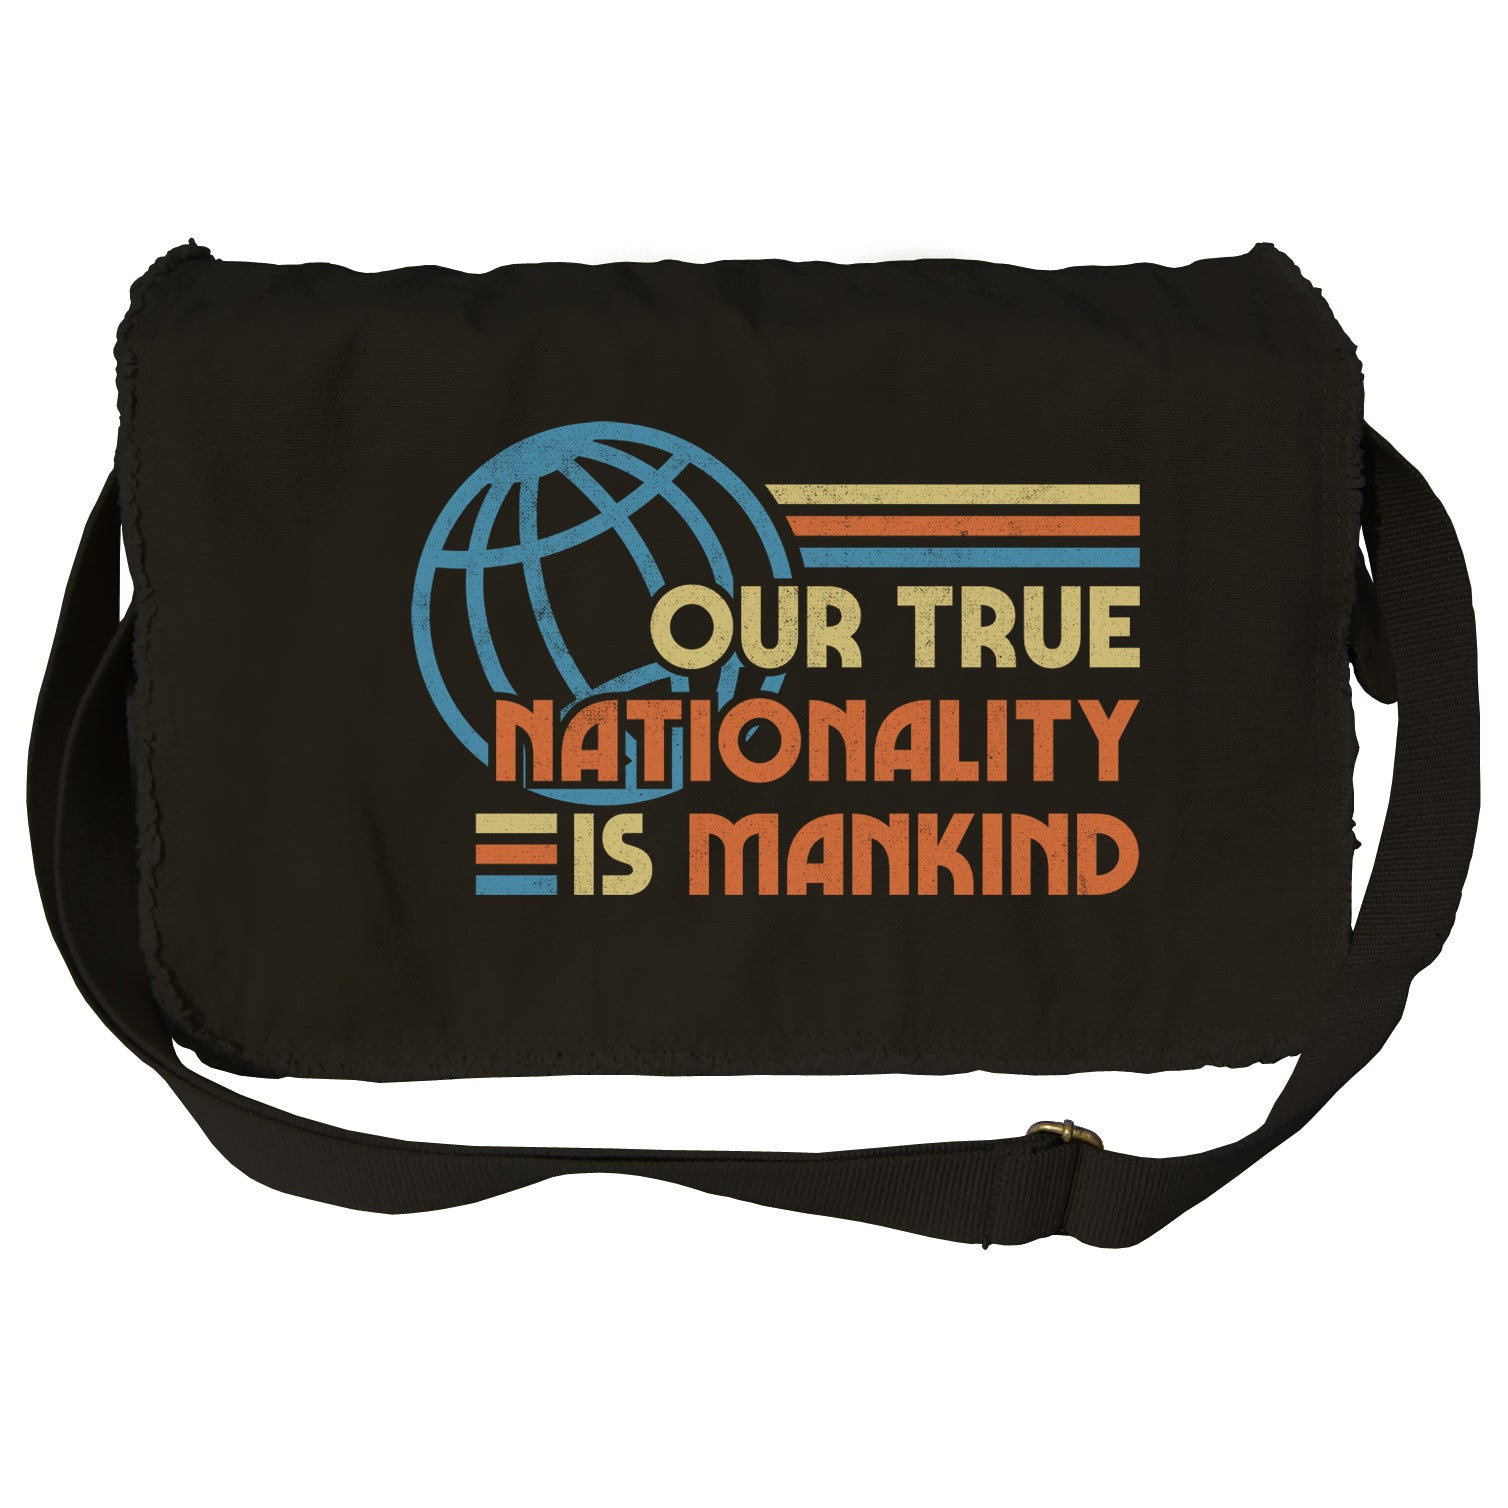 Our True Nationality is Mankind Messenger Bag